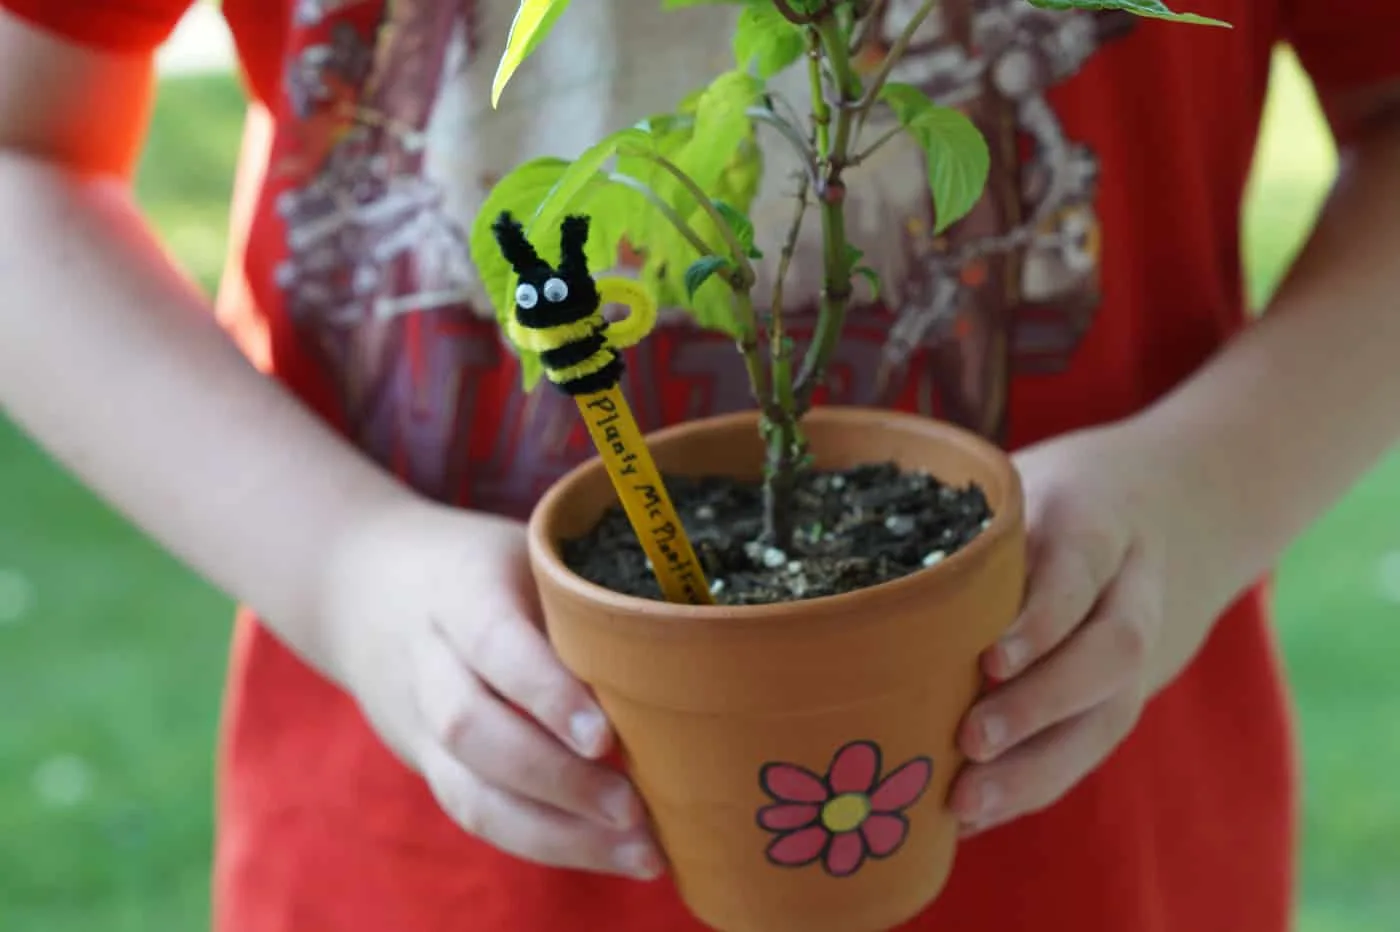 kid holding a potted plant with a bee garden marker. Planty Mc Plantface is written on the marker.